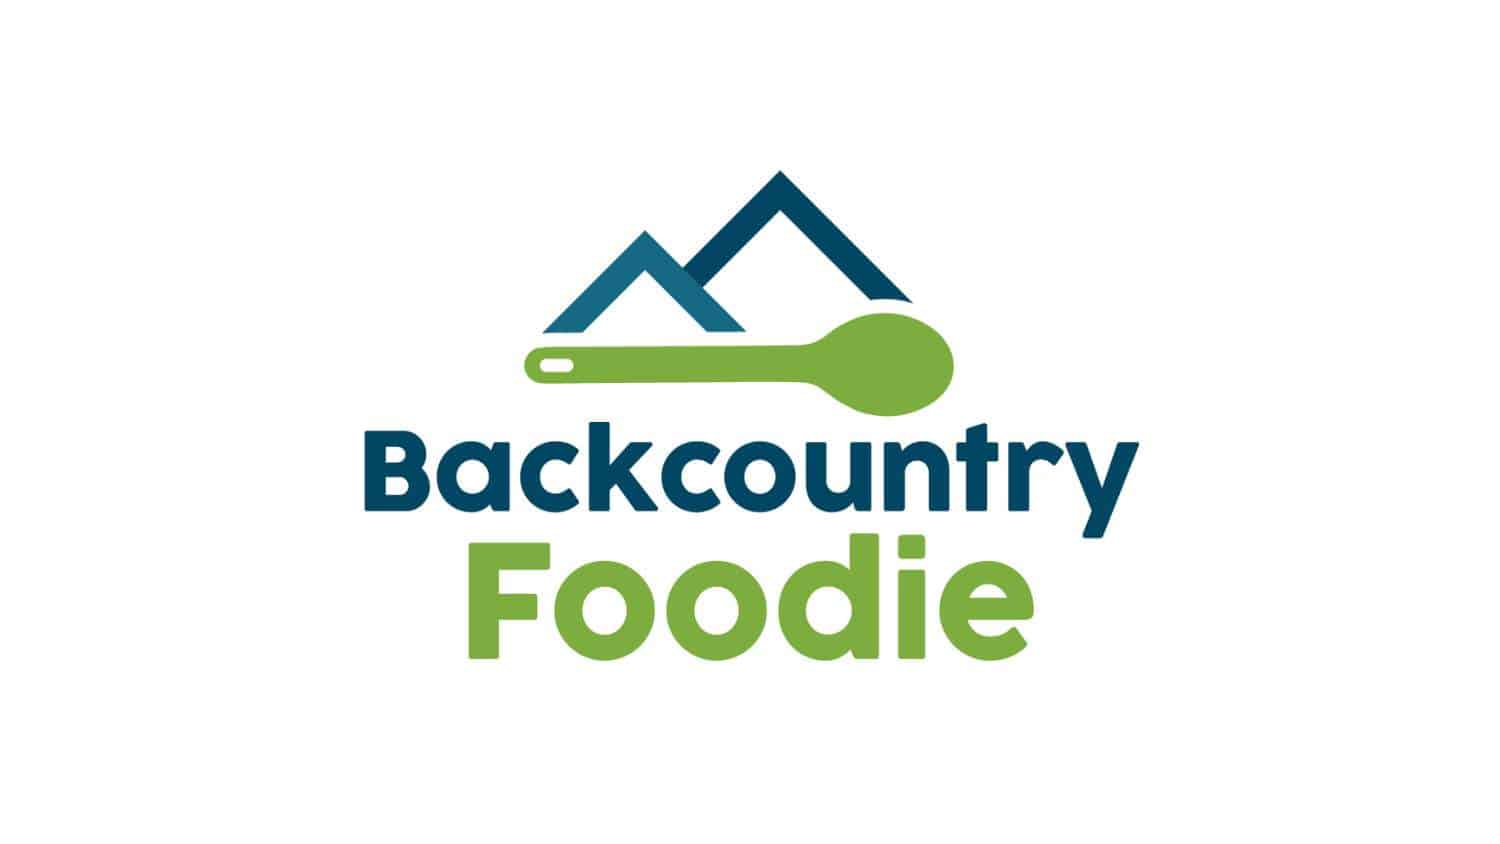 backcountry foodie featured logo image